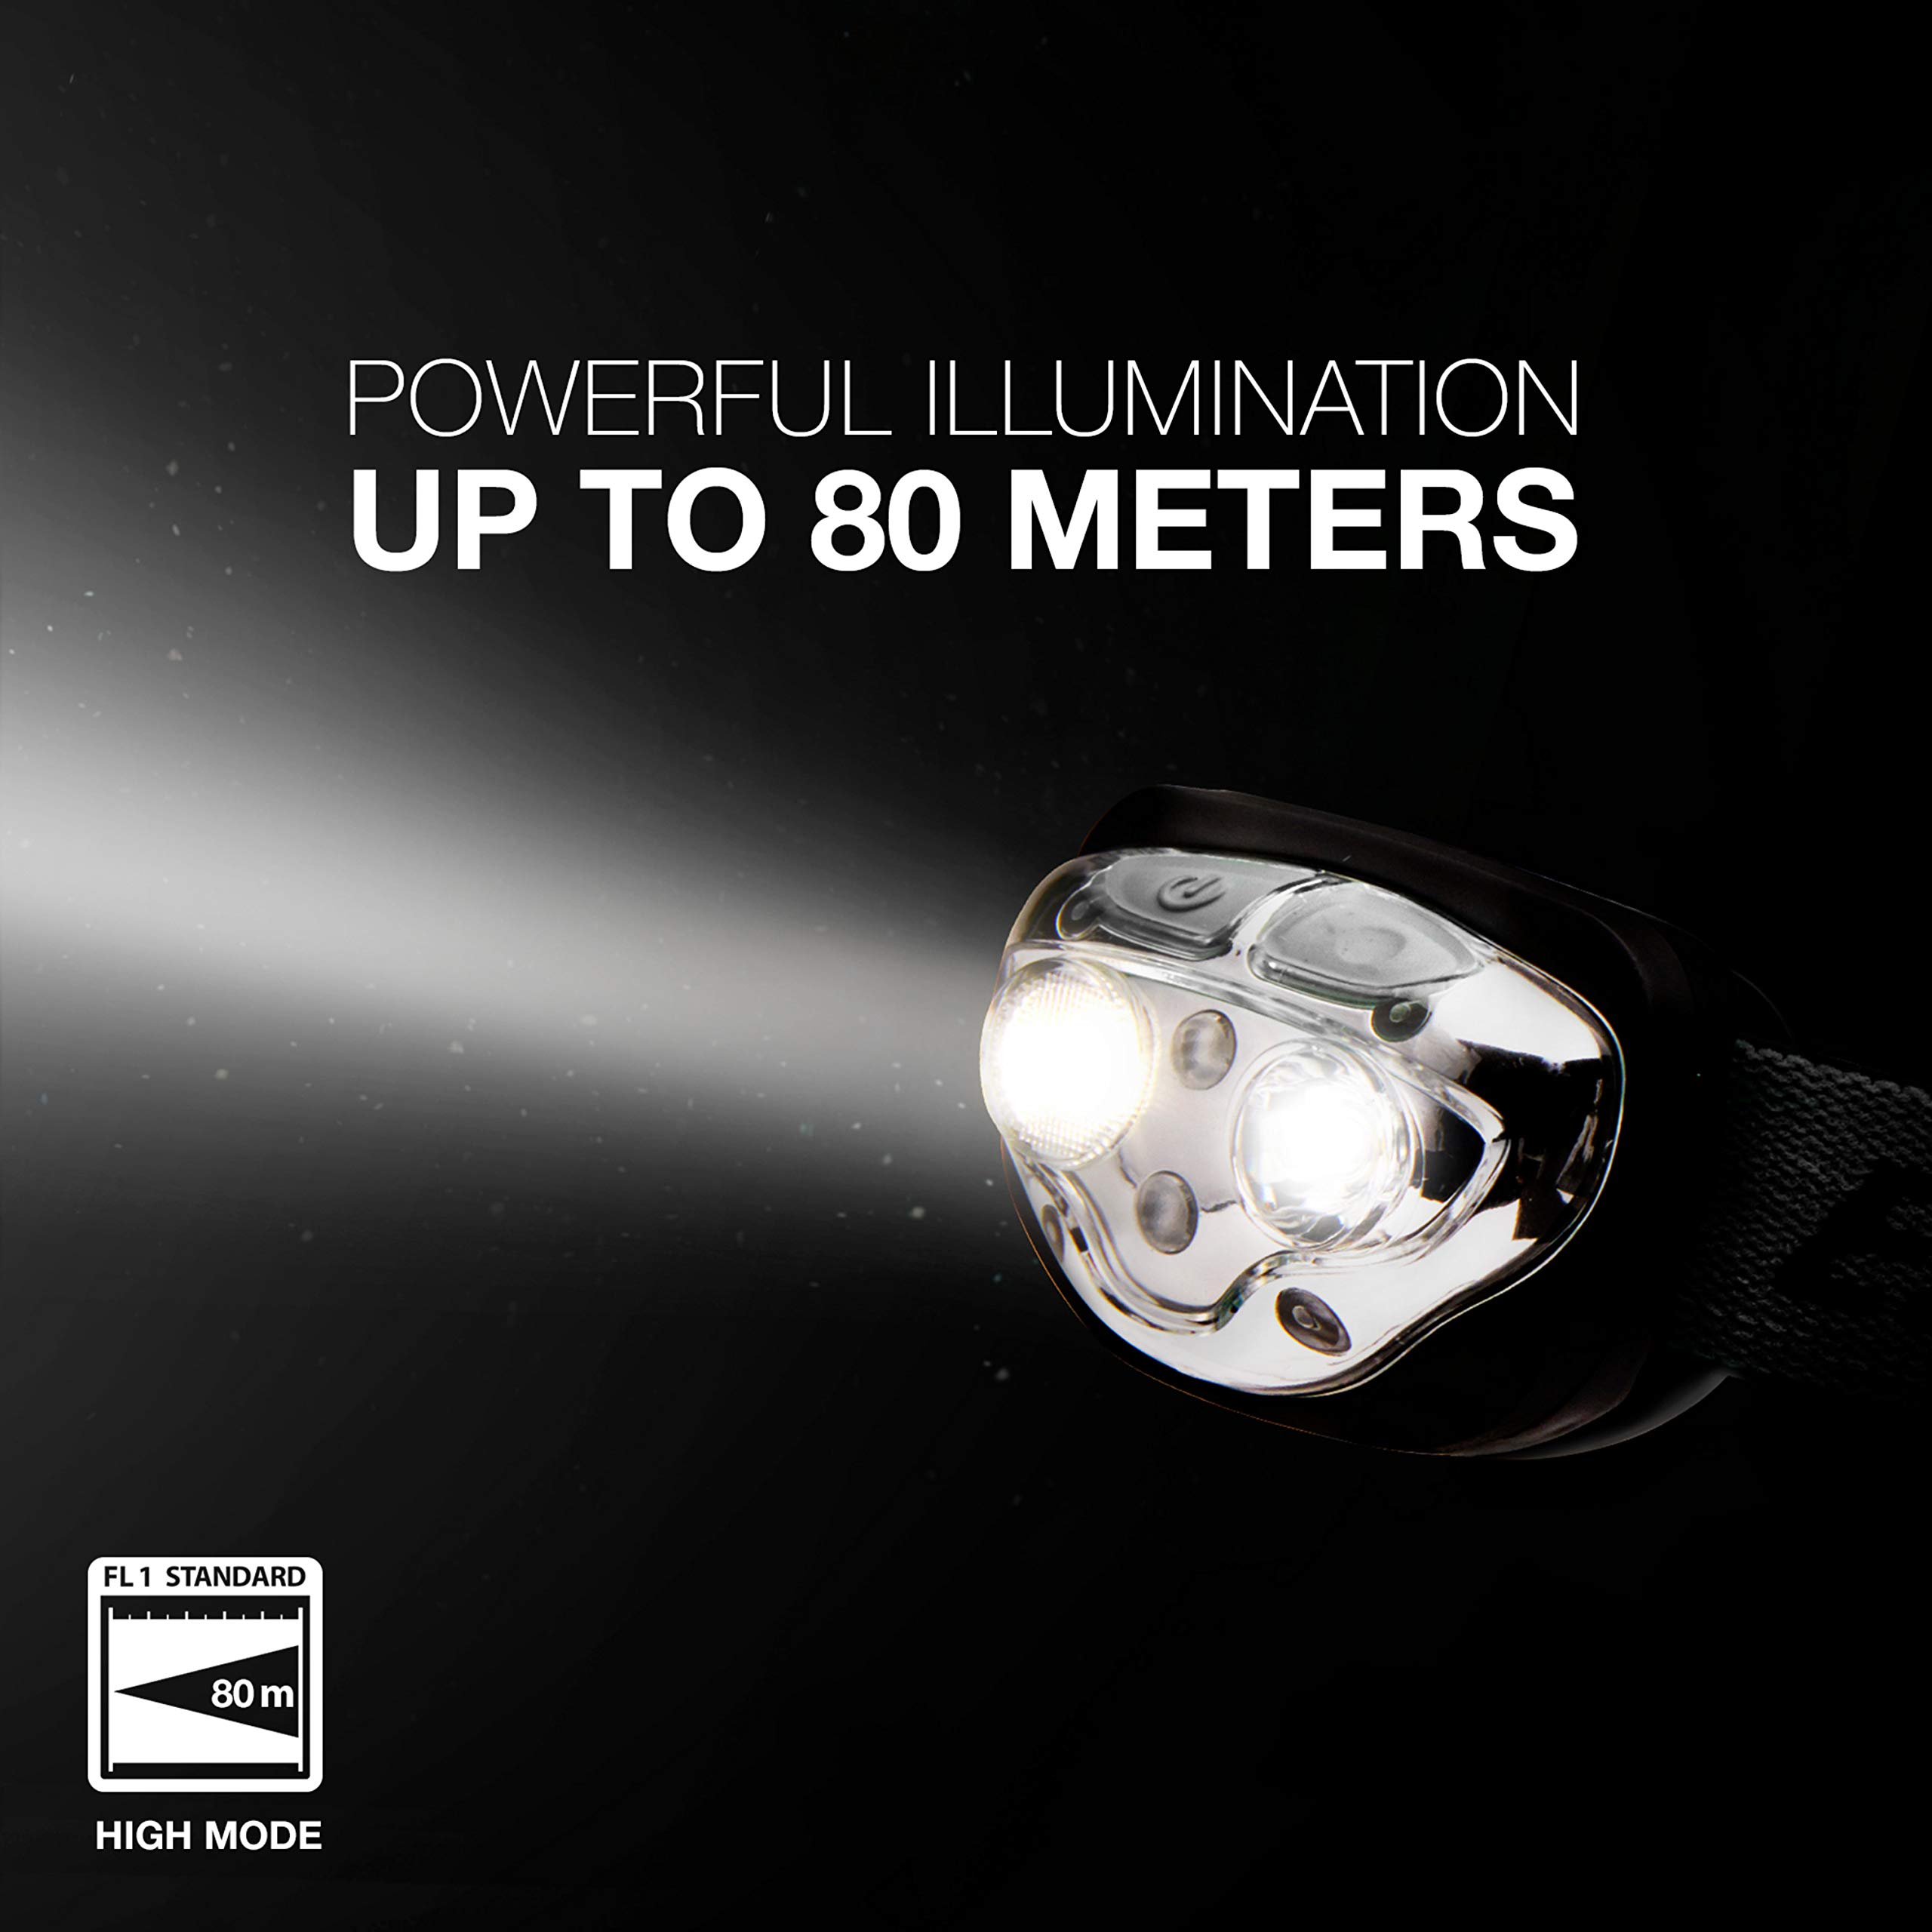 Energizer Rechargeable LED Headlamp Pro400, IPX4 Water Resistant, High-Powered Bright LED, Multiple Light Modes, Best Headlight for Camping, Running, Outdoors, Emergency Light, USB Included